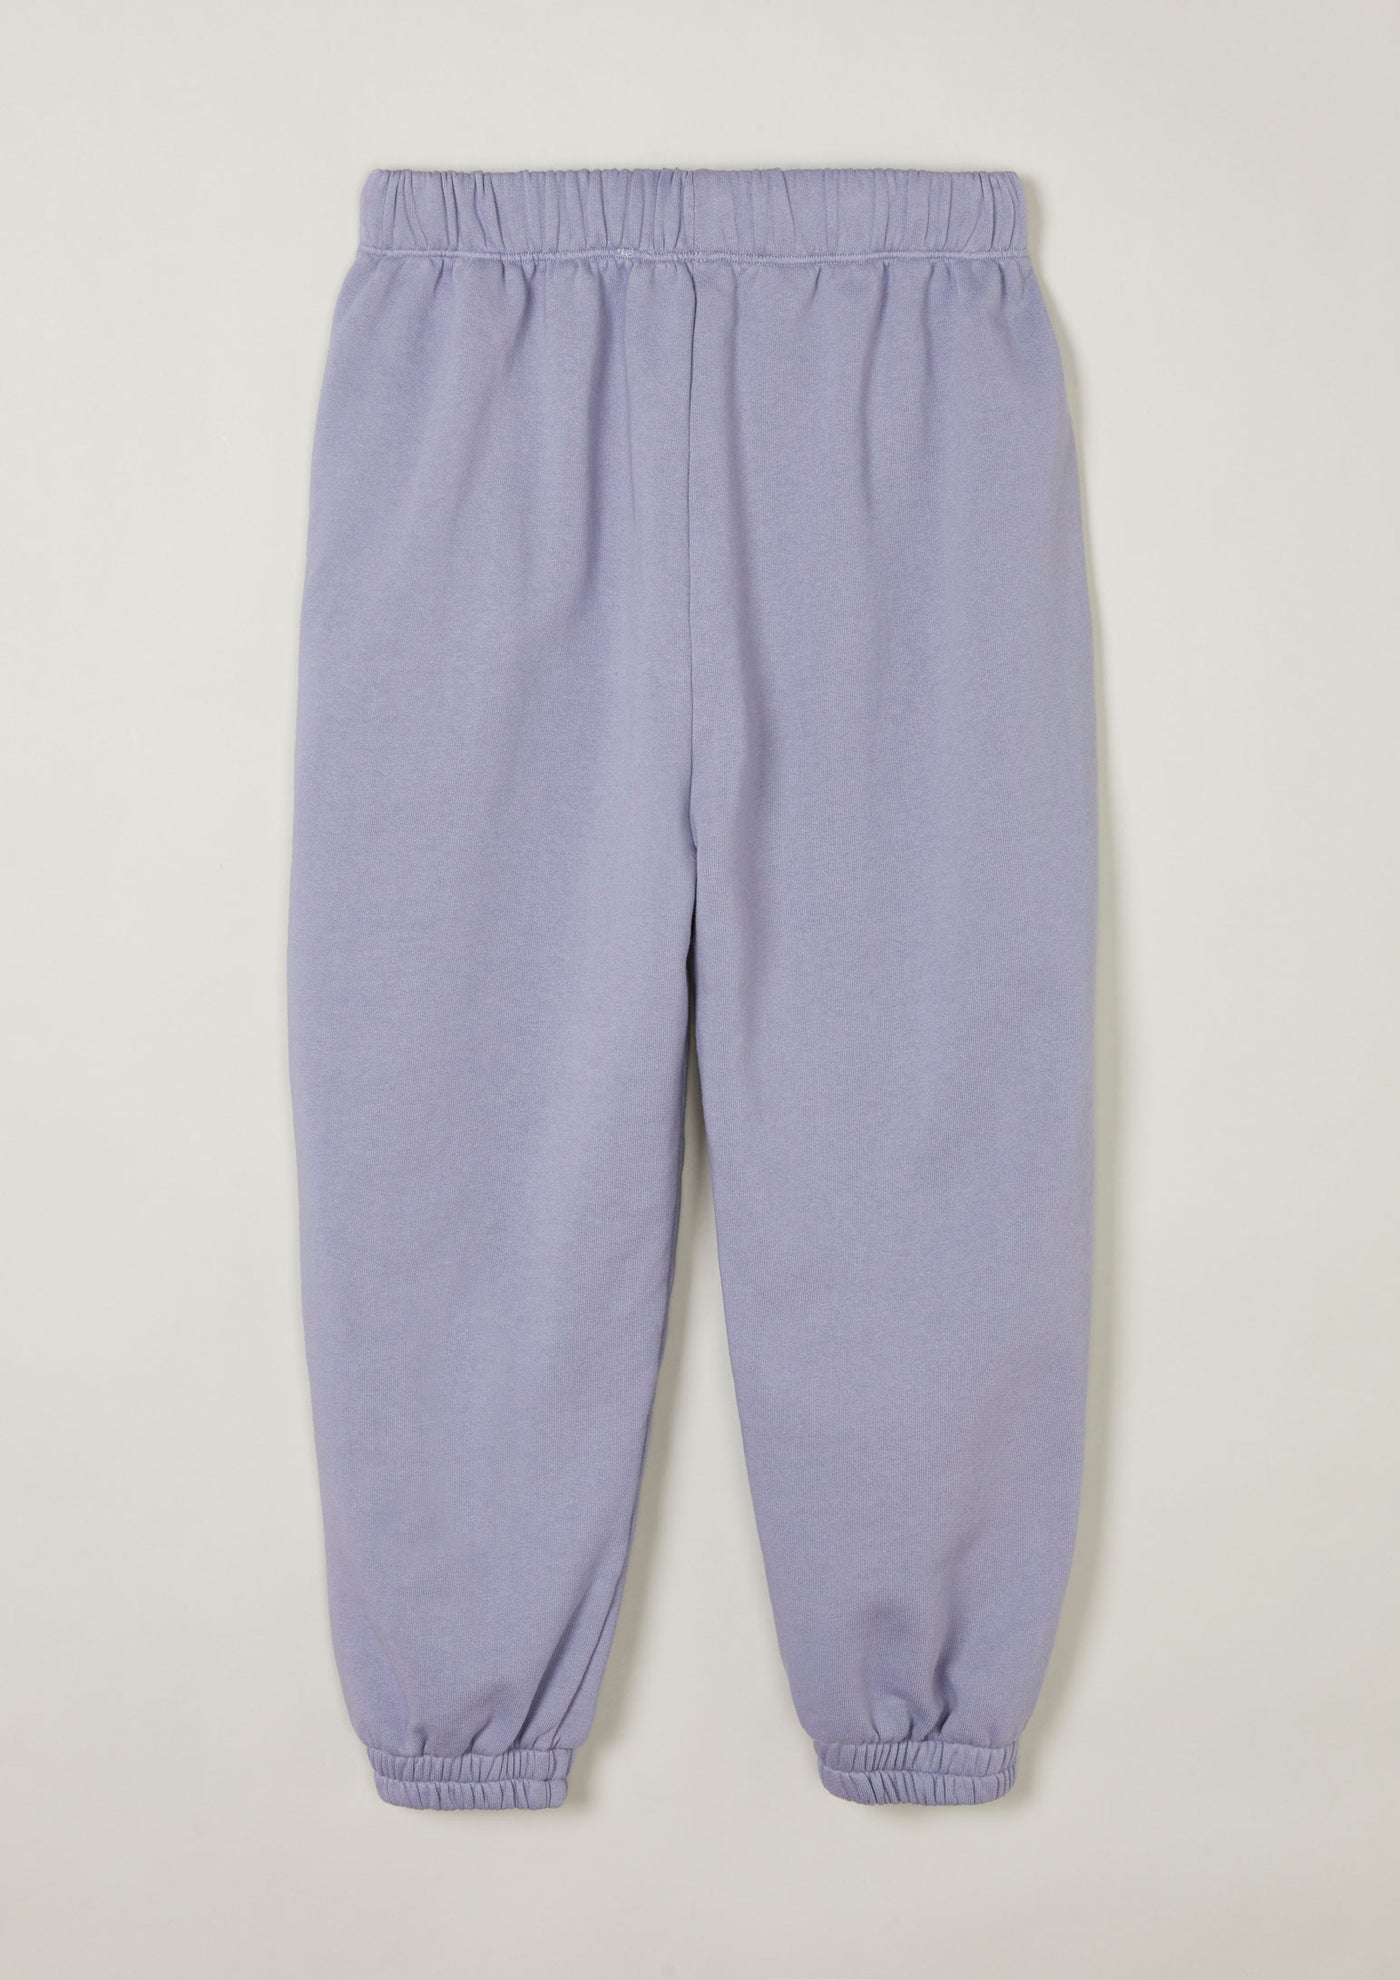 Track Pant - Silver Mist